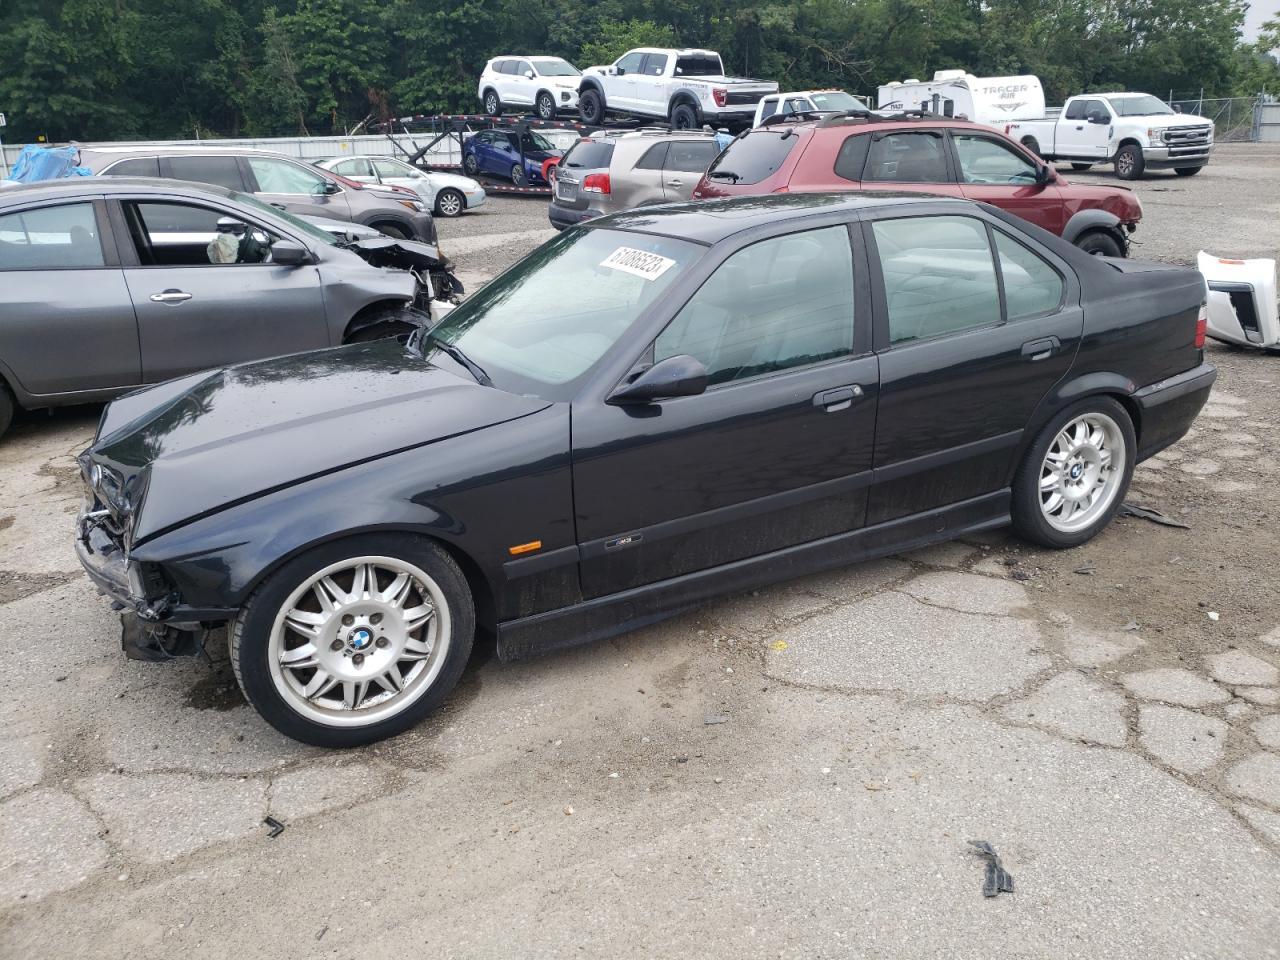 vin: WBSCD9321VEE05213 WBSCD9321VEE05213 1997 bmw m3 3200 for Sale in 15122 1321, Pa - Pittsburgh South, West Mifflin, USA